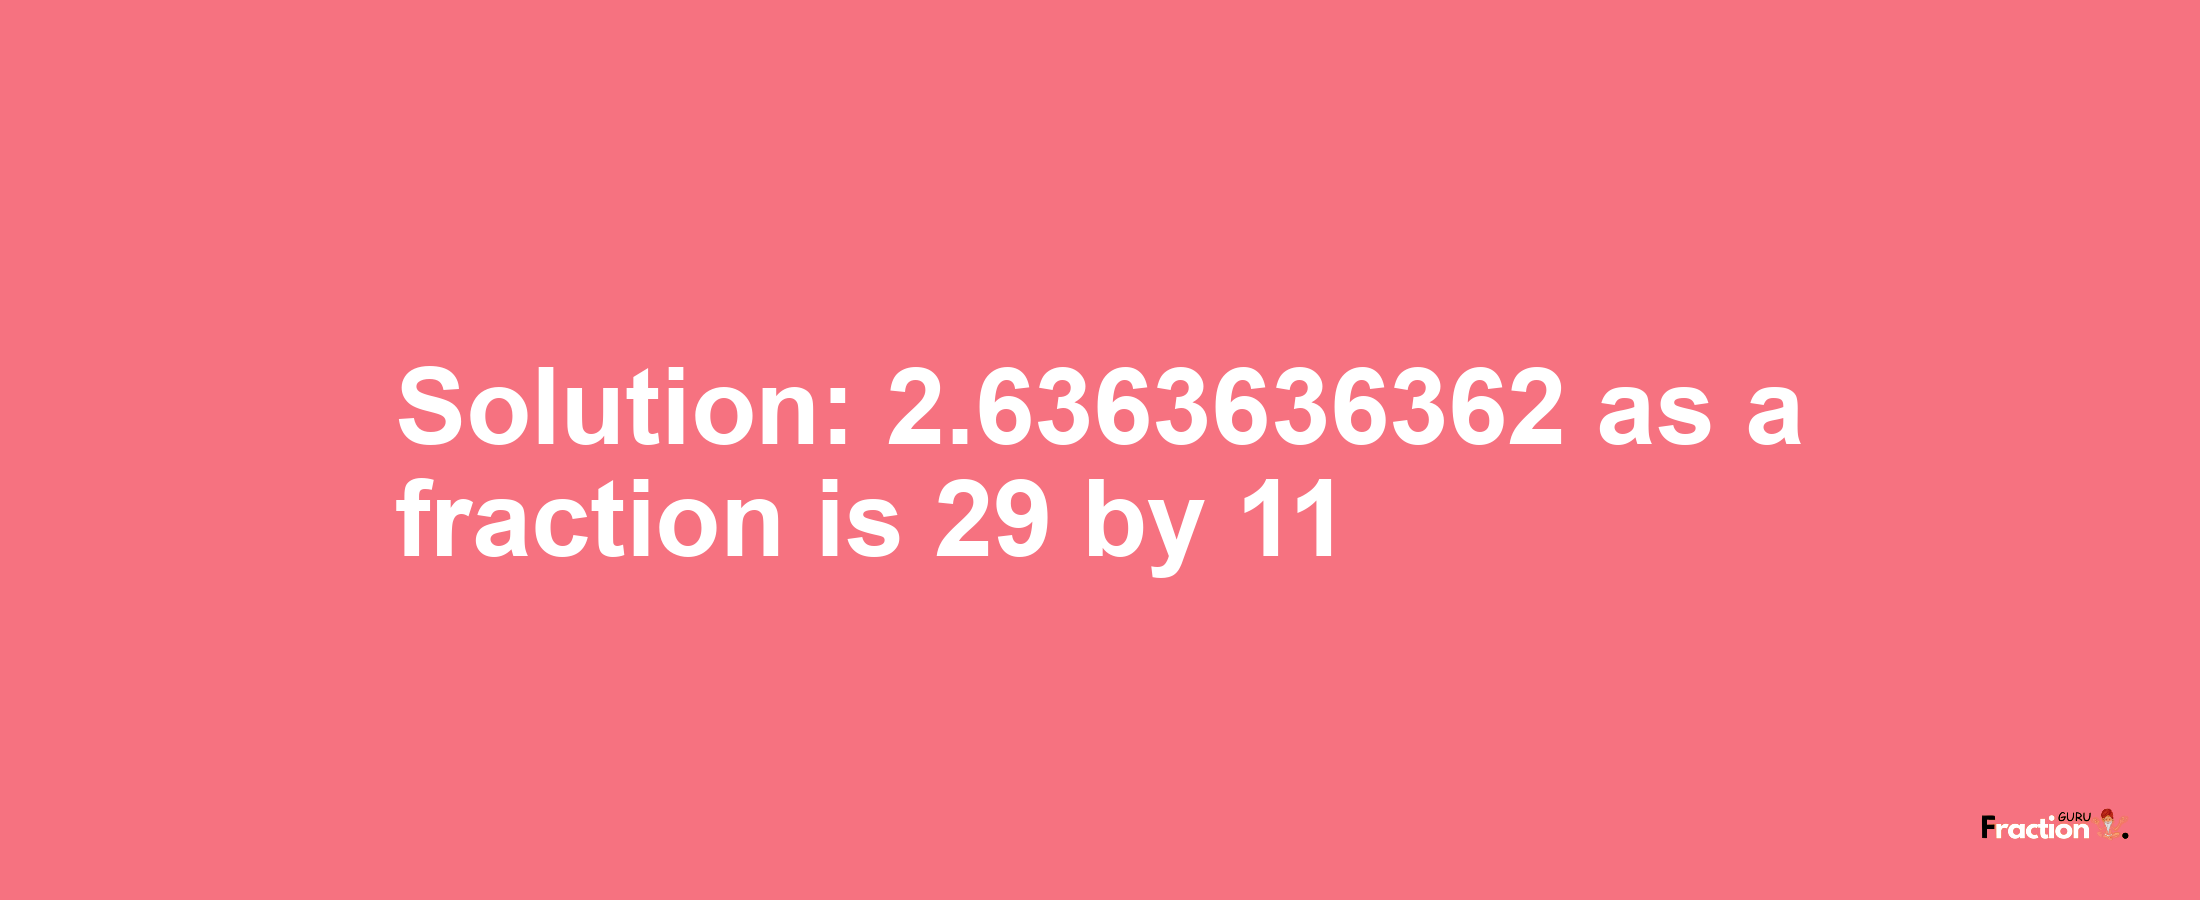 Solution:2.6363636362 as a fraction is 29/11